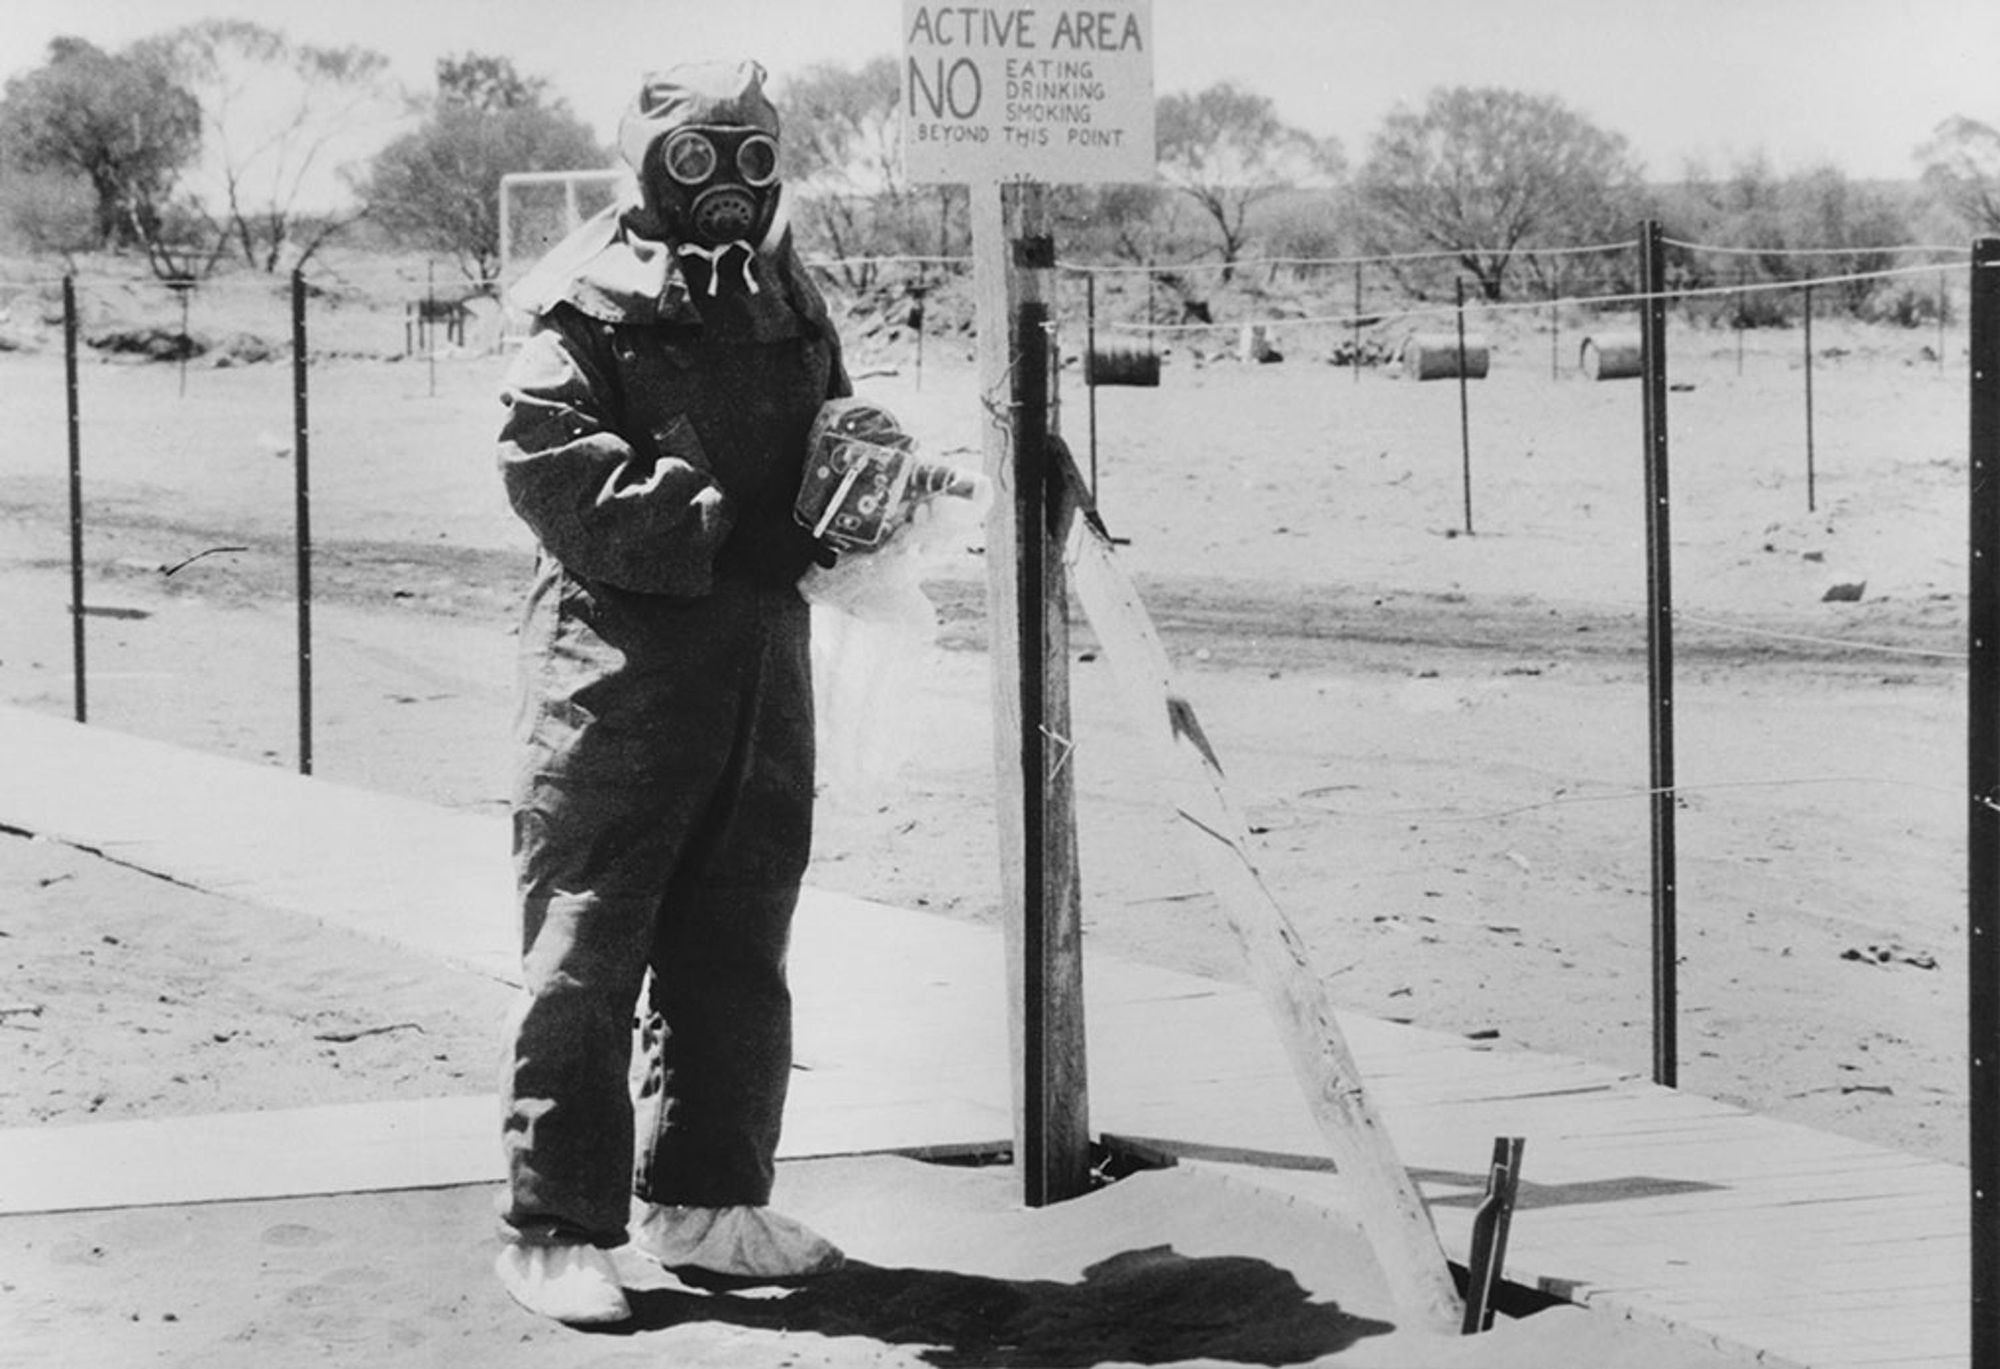 John L Stanier at Maralinga, Australia in protective clothing with a camera protected in a special plastic cover.